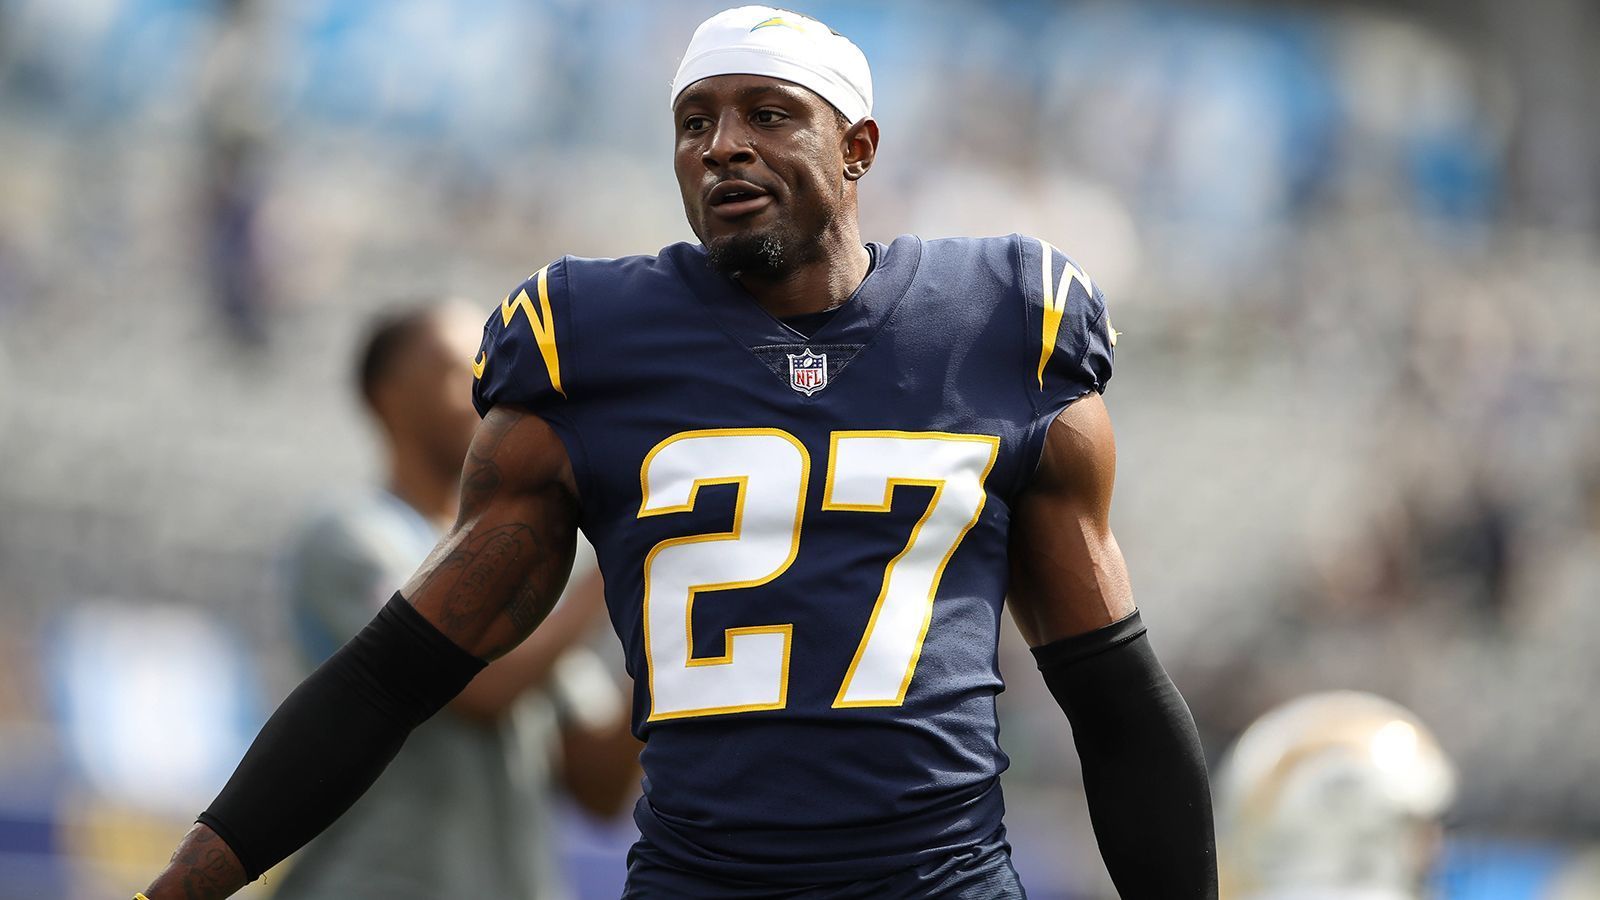 
                <strong>J.C. Jackson </strong><br>
                &#x2022; vollständiger Name: Jerald Christopher Jackson<br>&#x2022; Team: Los Angeles Chargers<br>&#x2022; Position: Cornerback<br>
              